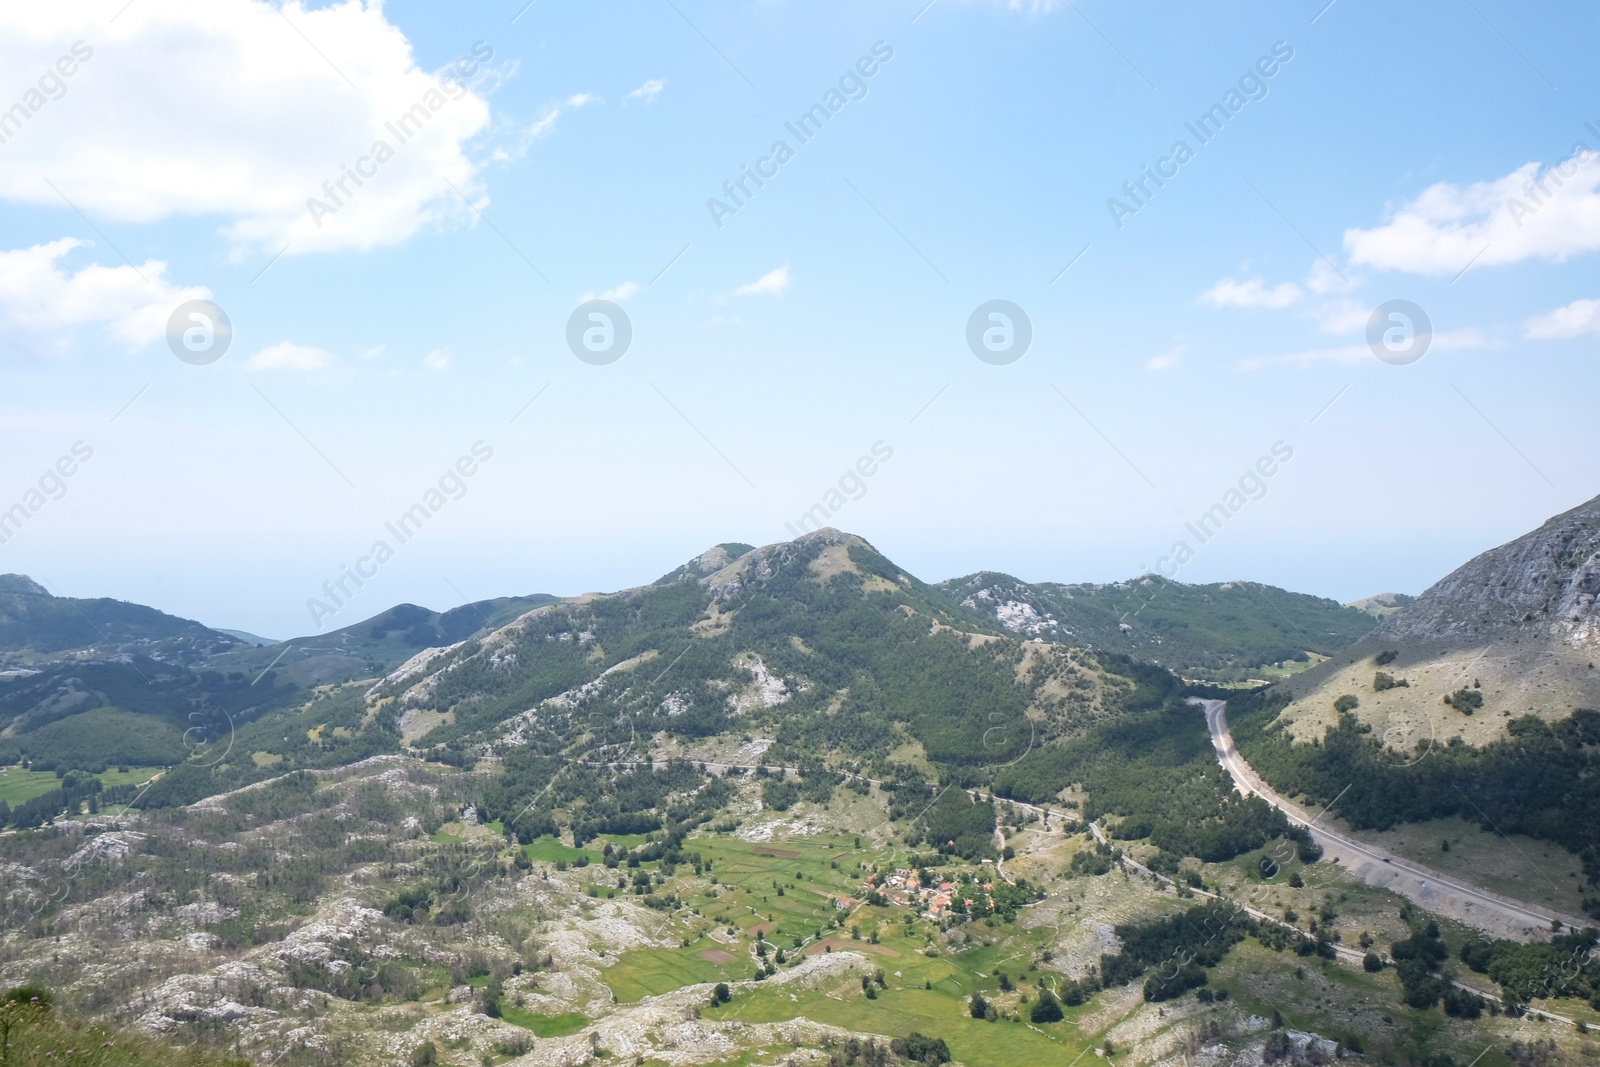 Image of Picturesque view of beautiful mountains under blue sky with clouds